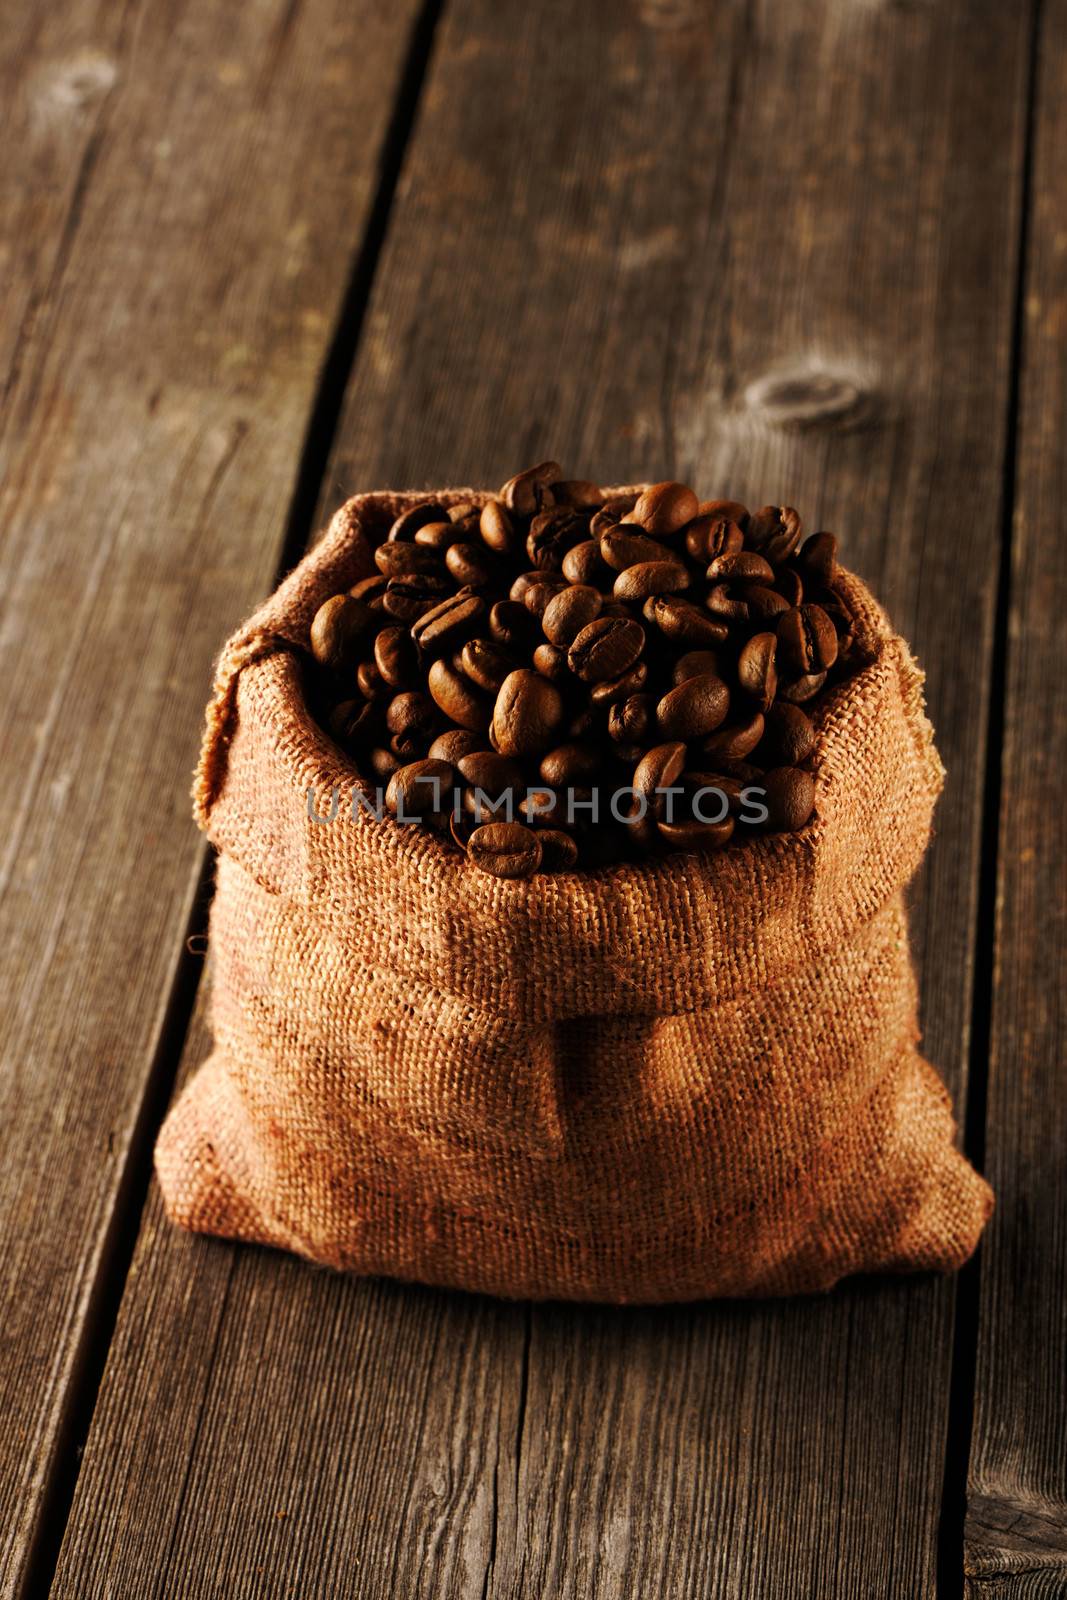 Coffee beans in bag on wooden table